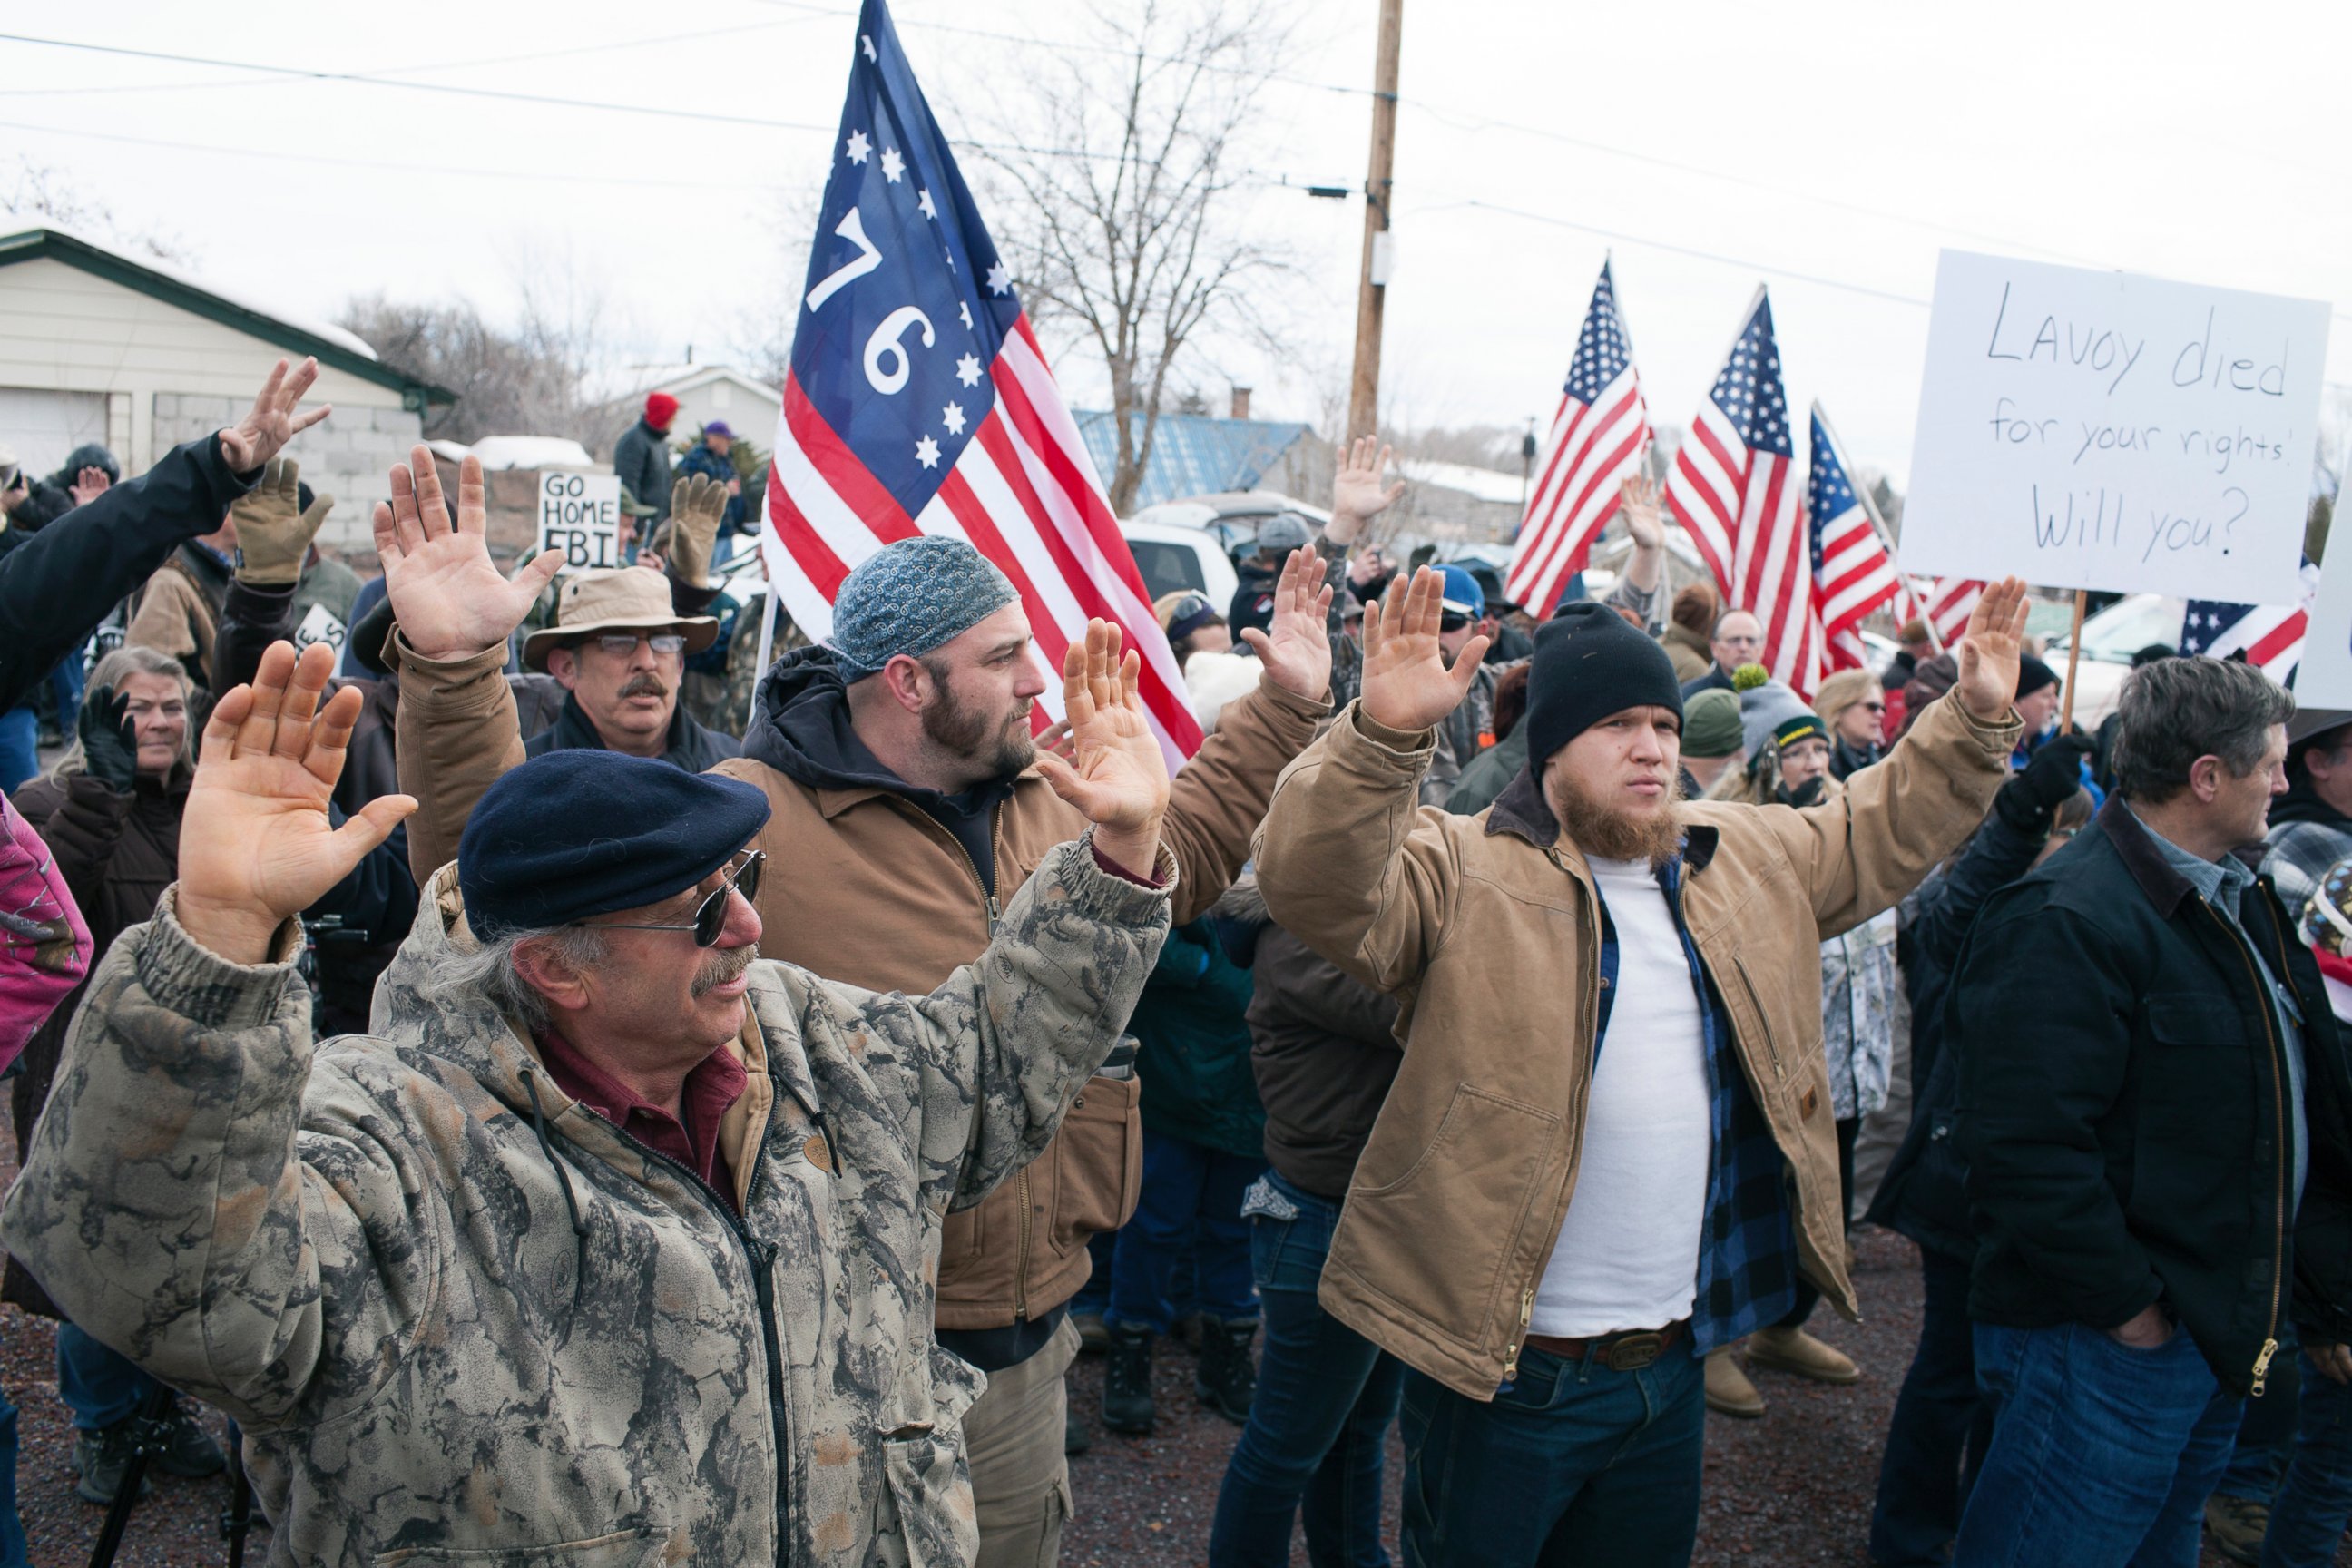 PHOTO: Anti-government protesters raise their arms in the air and shout "hands up don't shoot" outside the Harney County Courthouse on Feb. 1, 2016 in Burns, Oregon. 